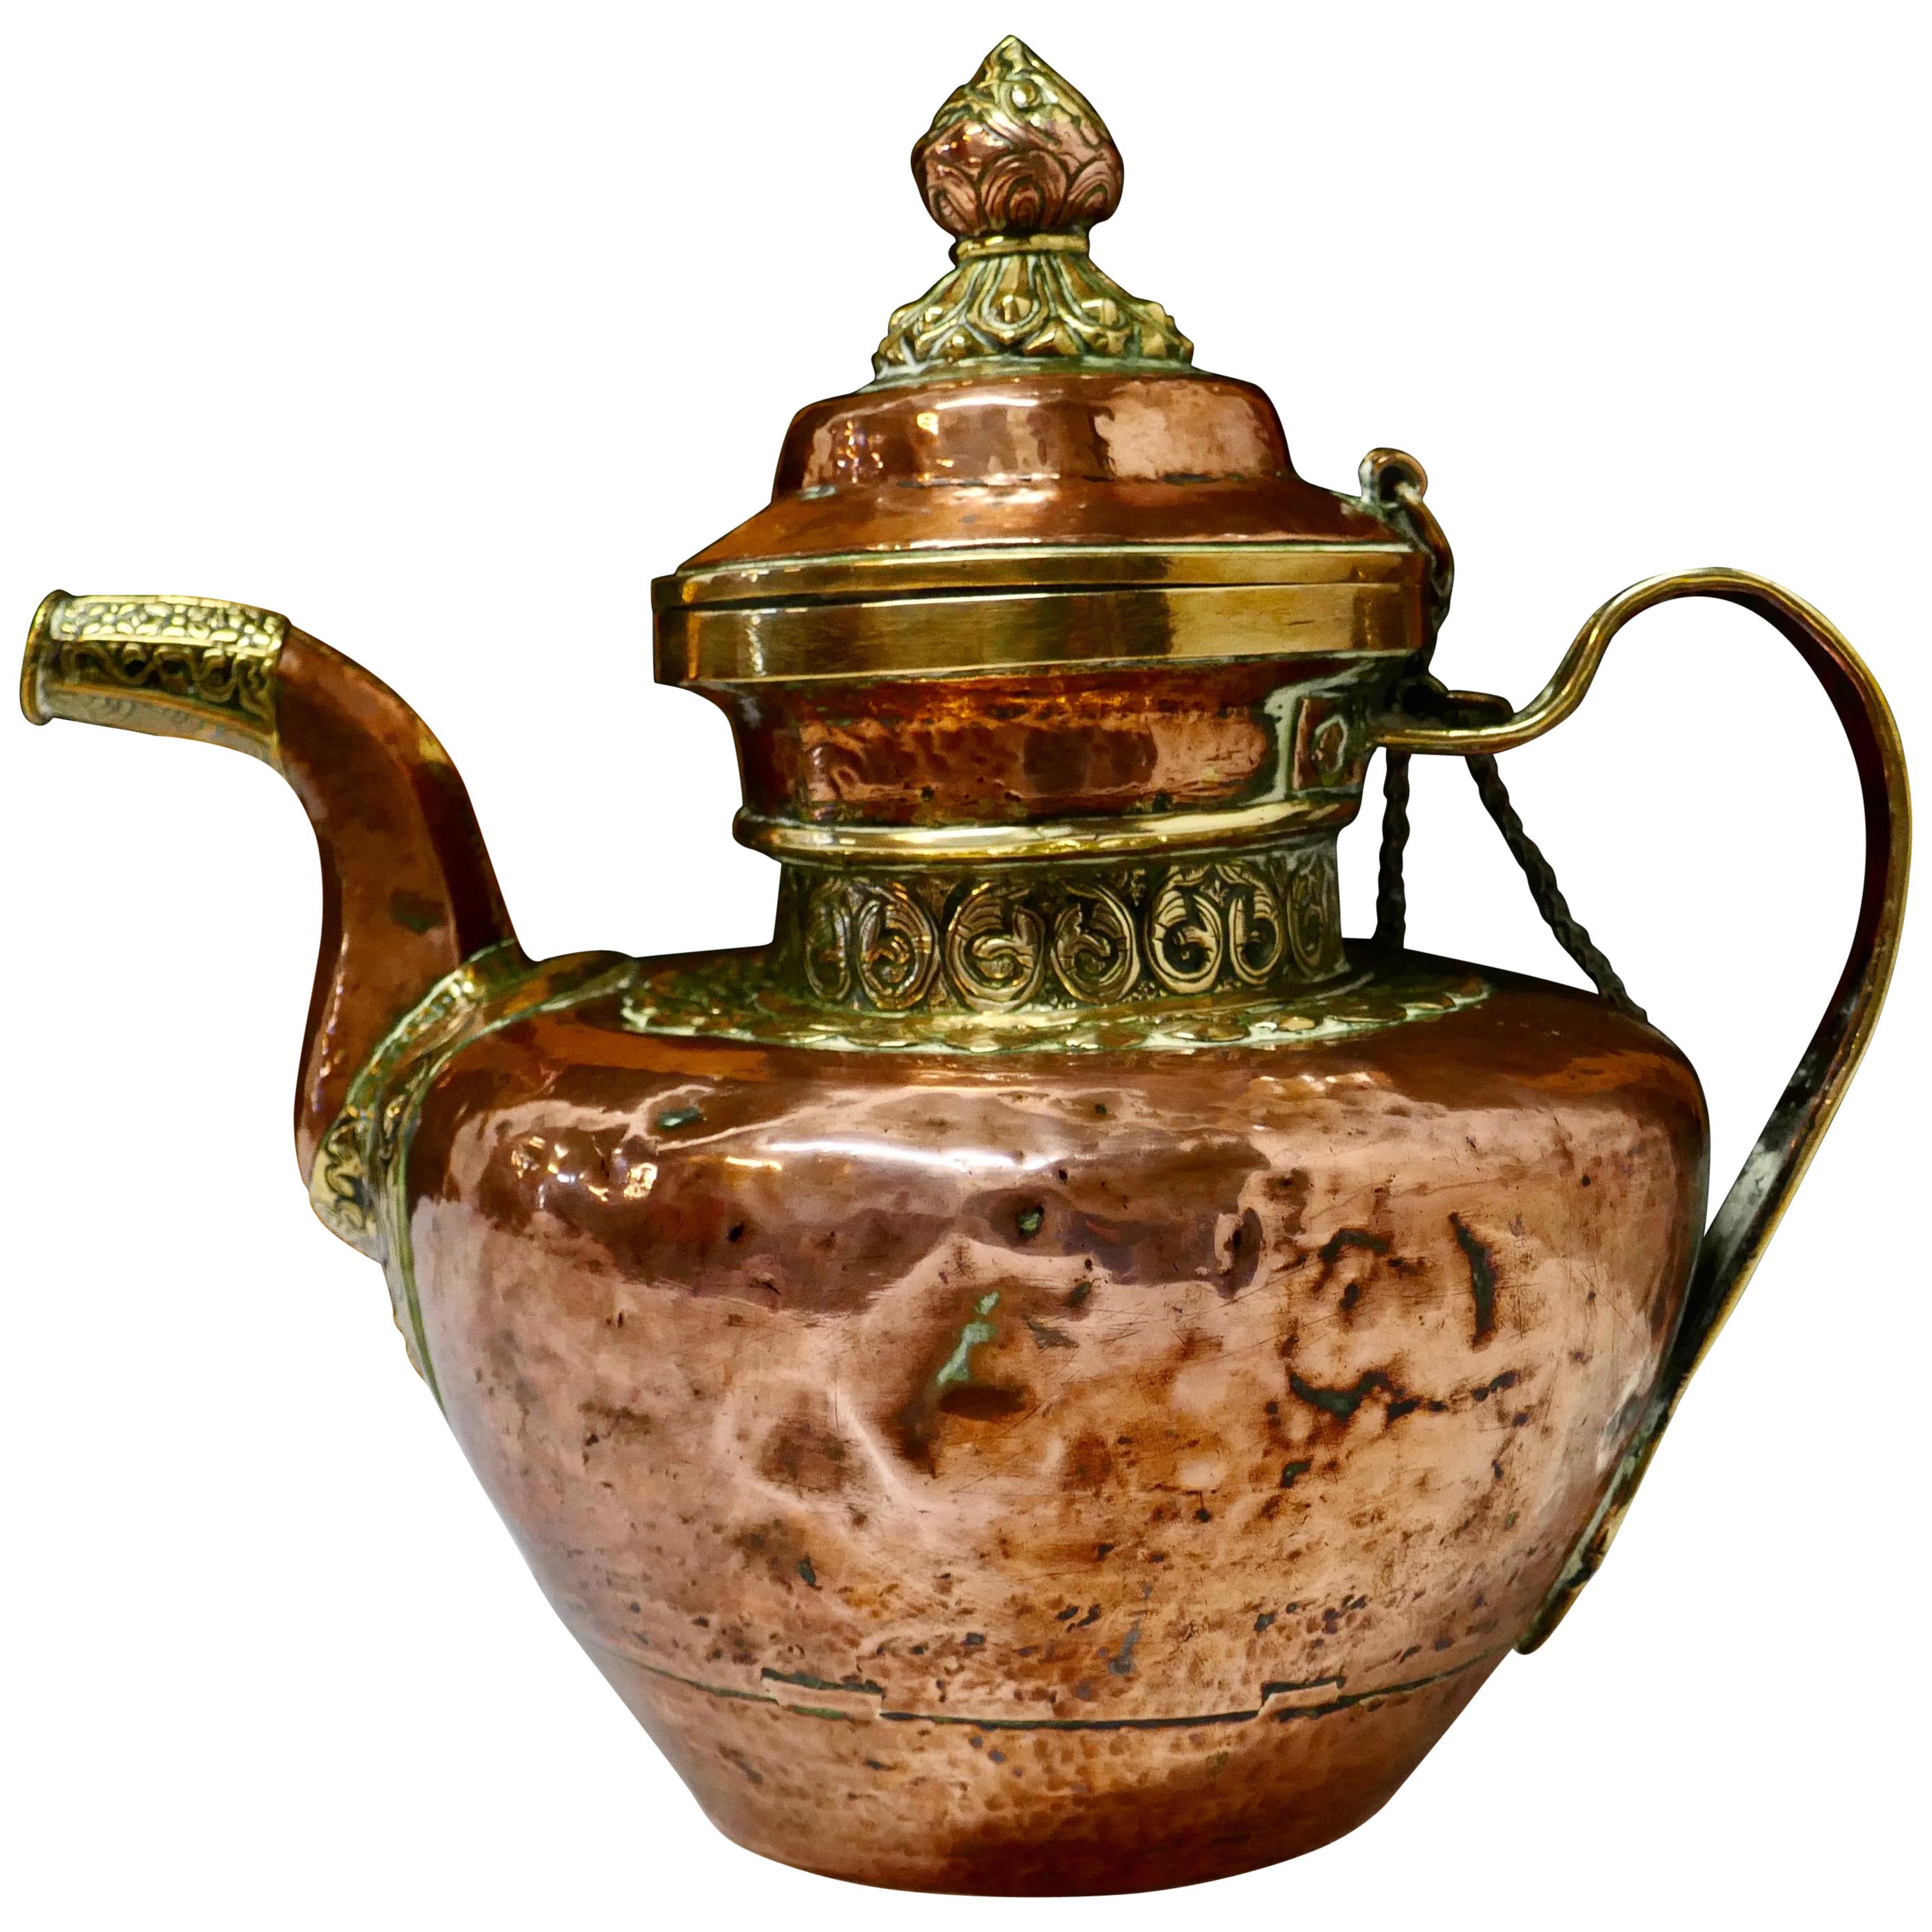 Charming 19th Century Indian Beaten Copper and Chased Brass Tea Pot